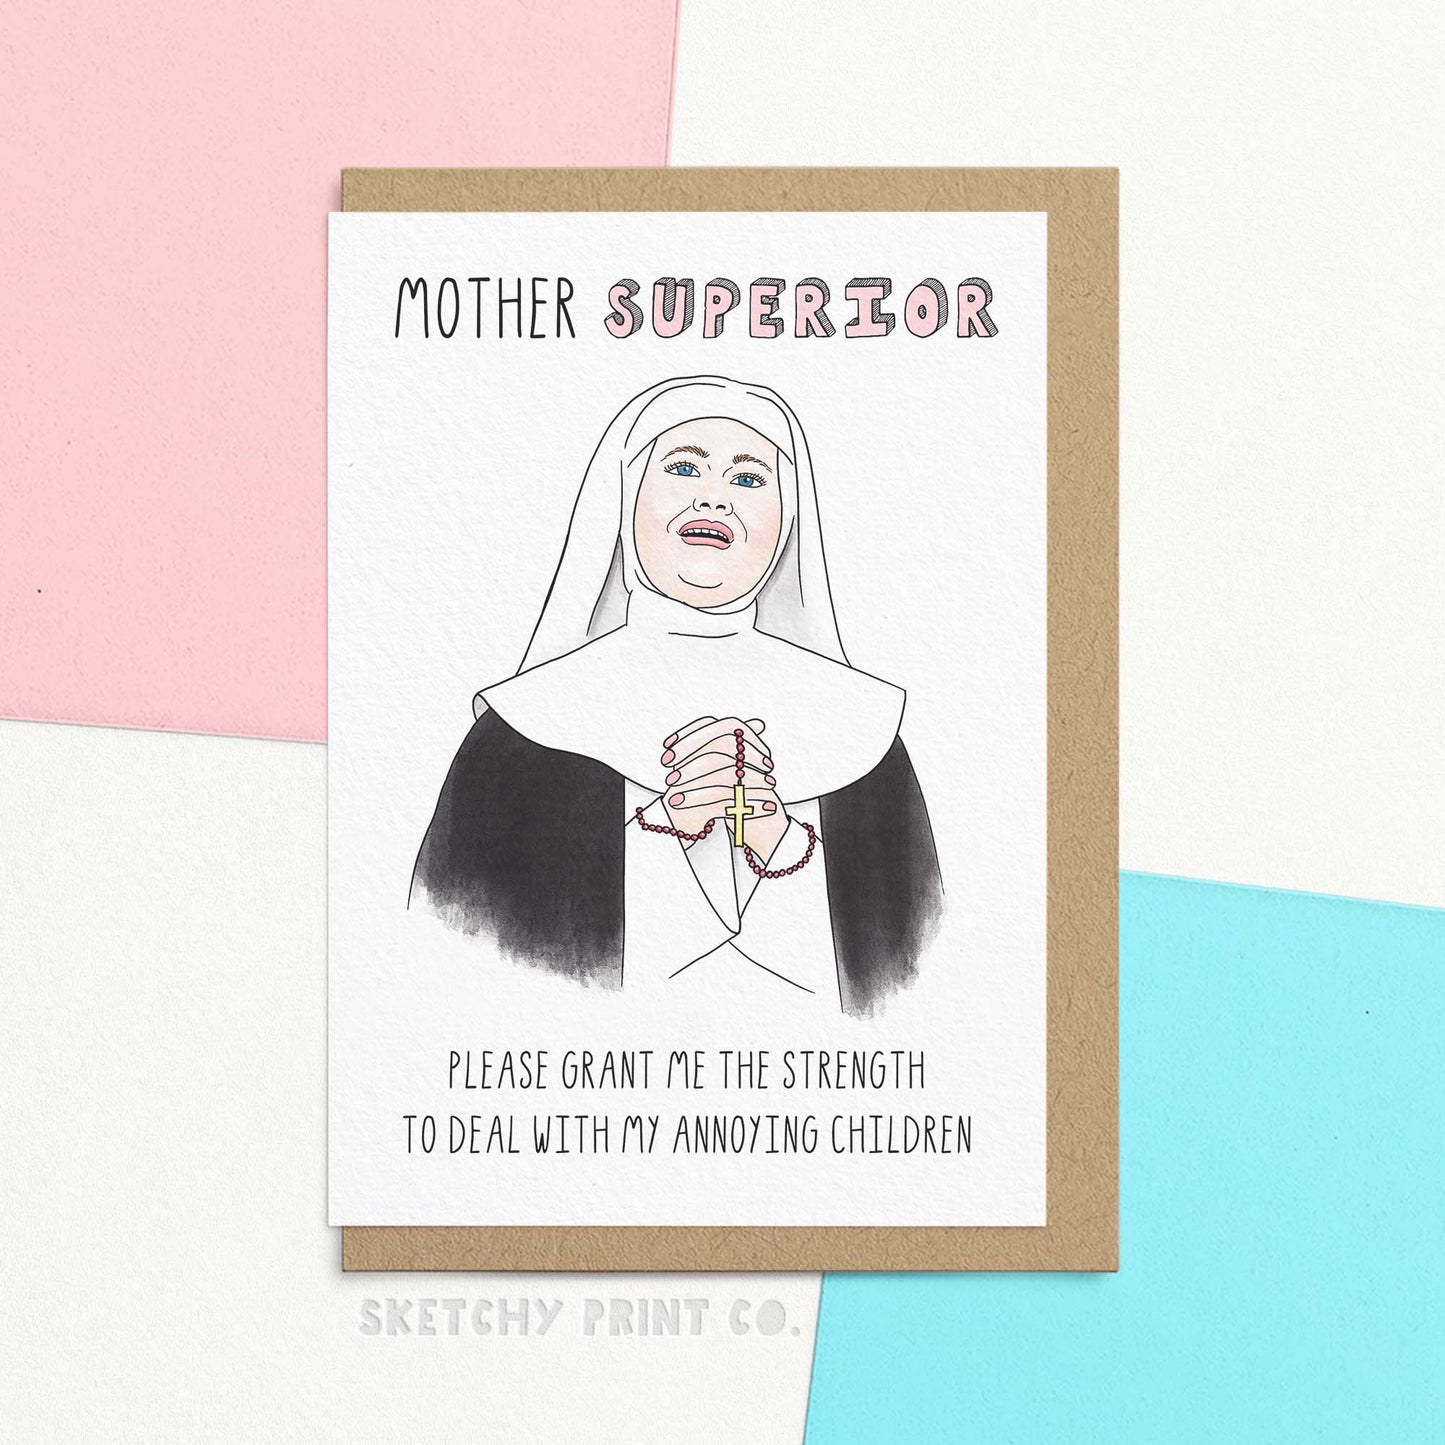 Funny Mother's Day Card saying 'Mother superior, please grant me the strength to deal with my annoying children' Make your mom laugh with Mother Superior, the perfect funny card for Mother's Day. Packed with hilarious nun jokes and not so christian birthday wishes or happy Mother's Day messages, this funny mum birthday card is guaranteed to bring a smile to your mum's face. Pair with funny Mother's Day gifts and give the gift of laughter!